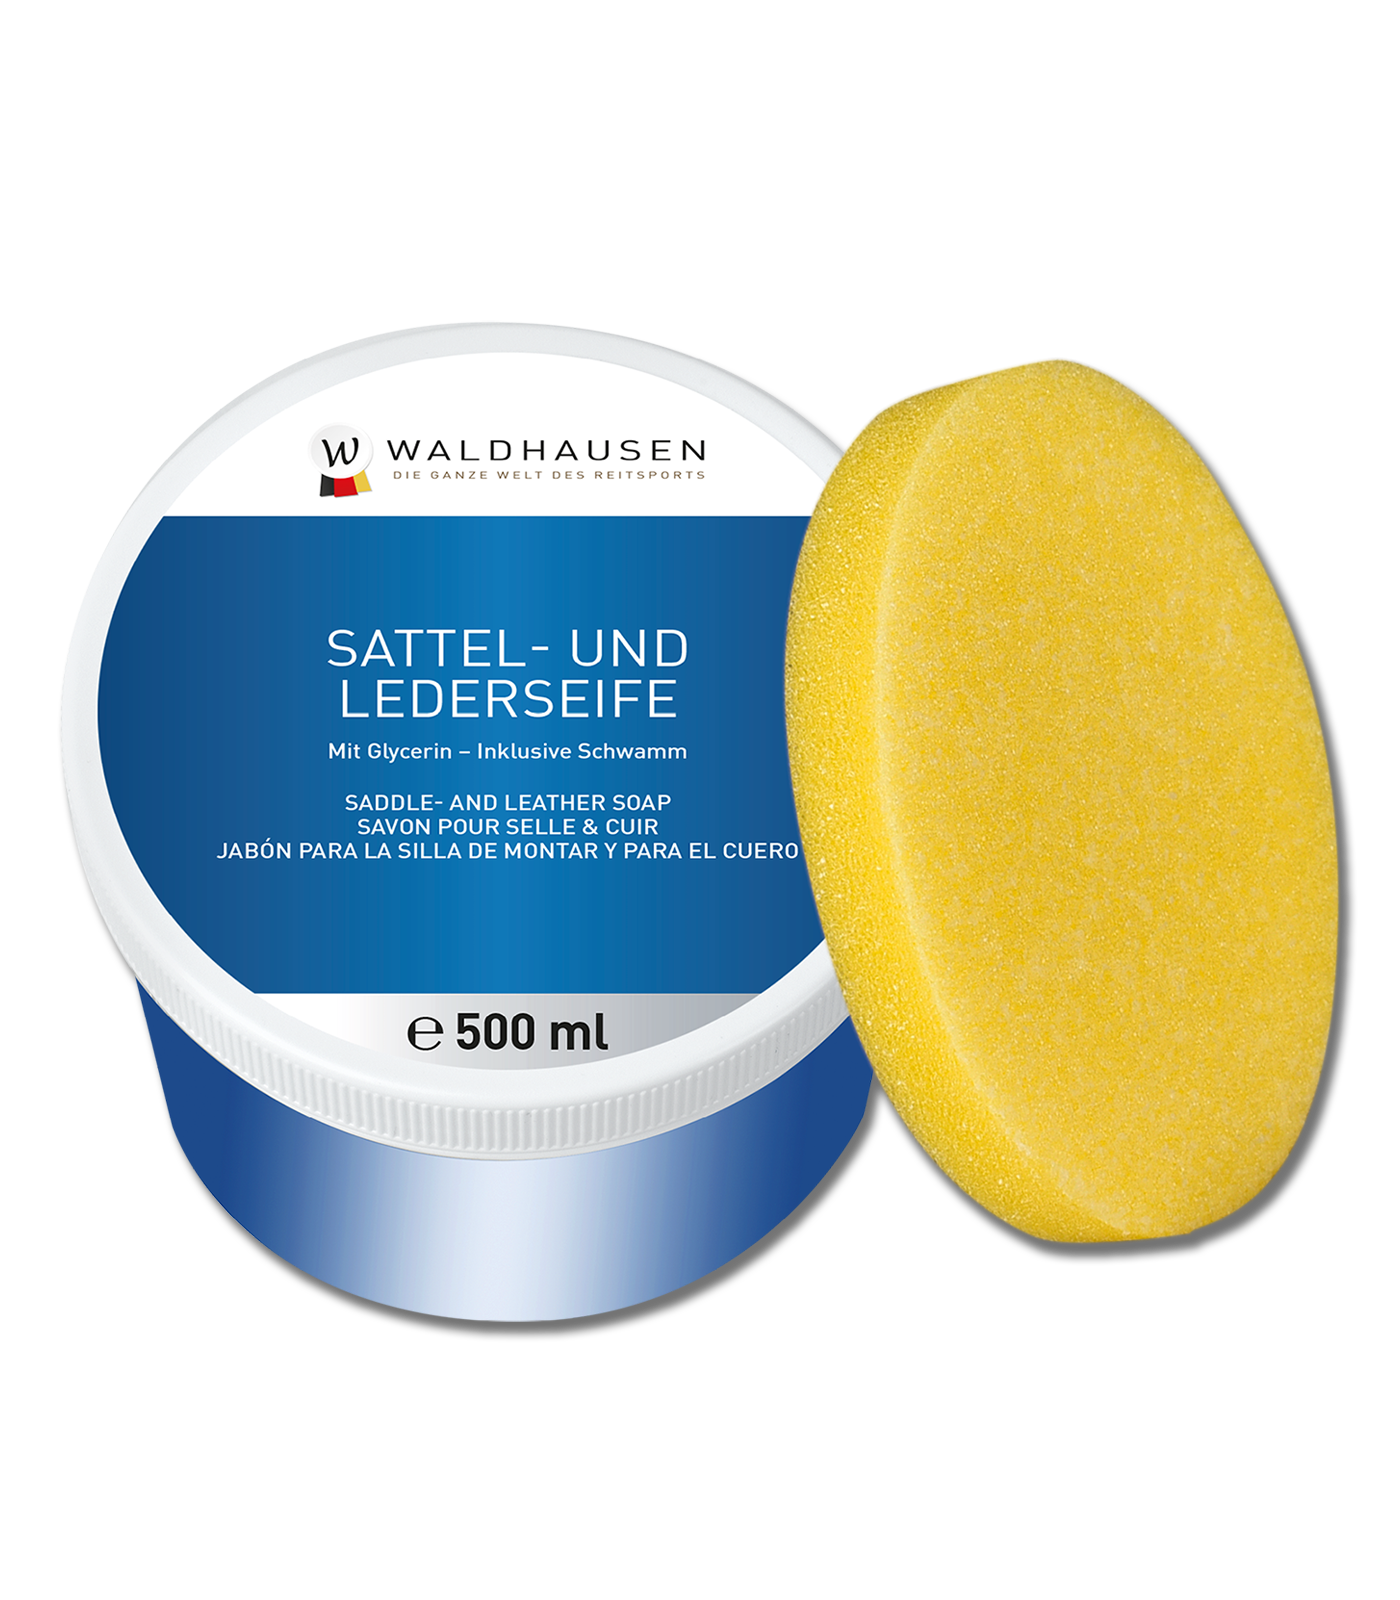 Saddle & Leather Soap in a Tin, 500 ml